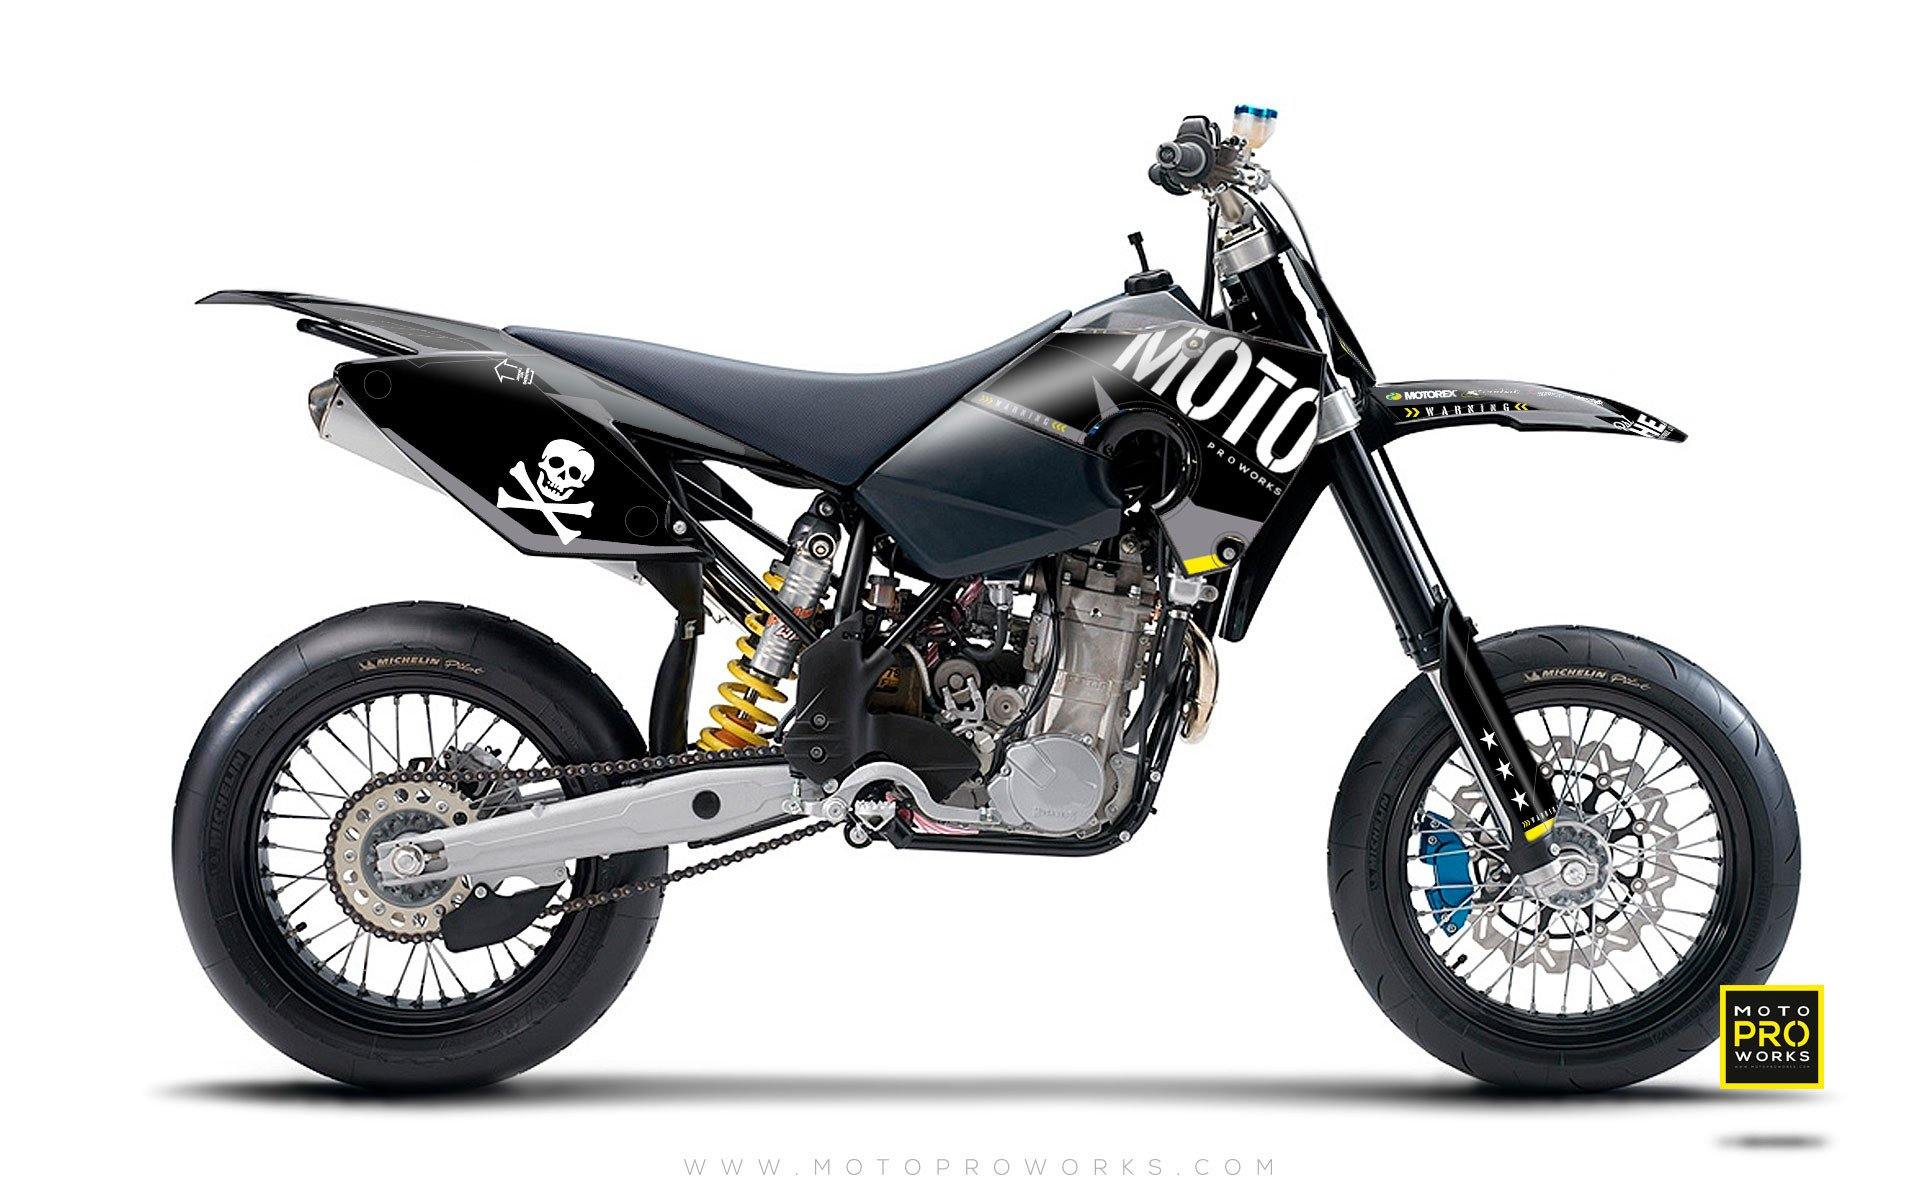 Husaberg GRAPHIC KIT - "GTECH" (black) - MotoProWorks | Decals and Bike Graphic kit